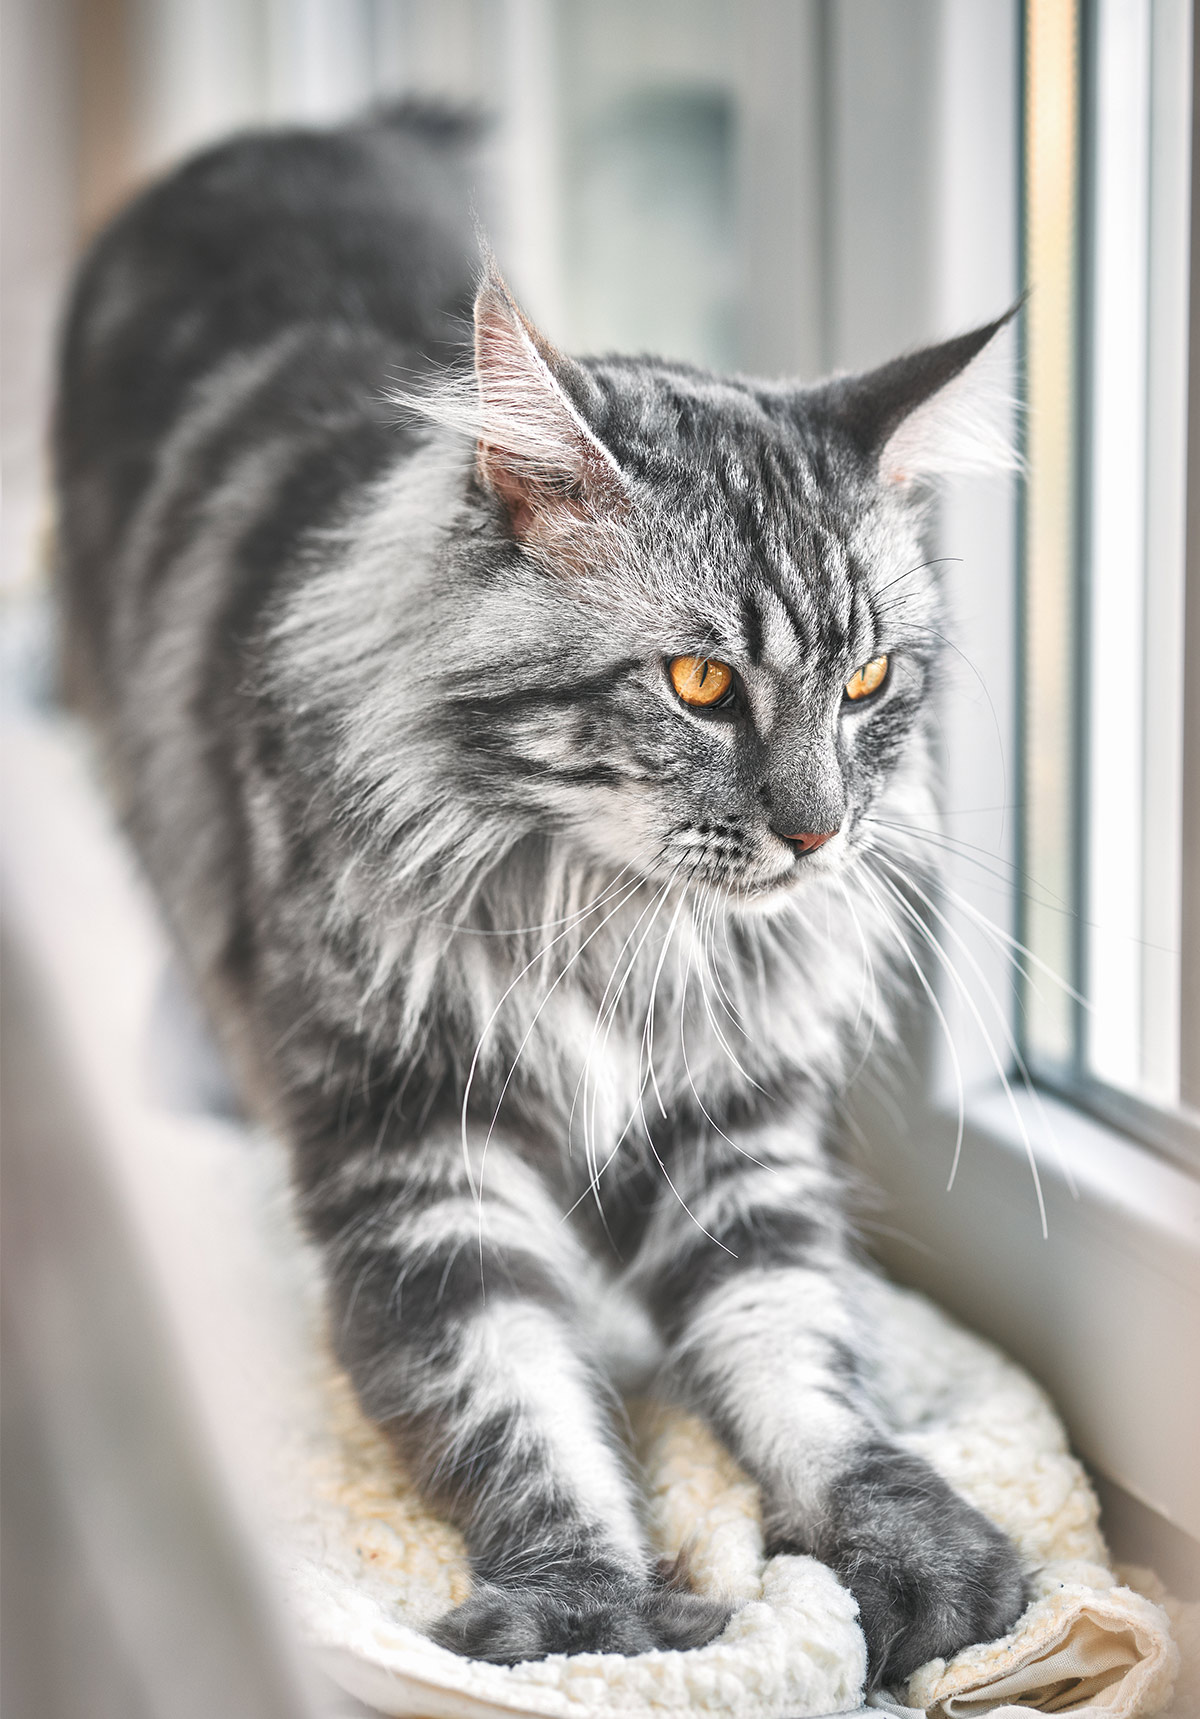 Explore Our Stunning Collection of Maine Coon Cat Photos - Yeudon